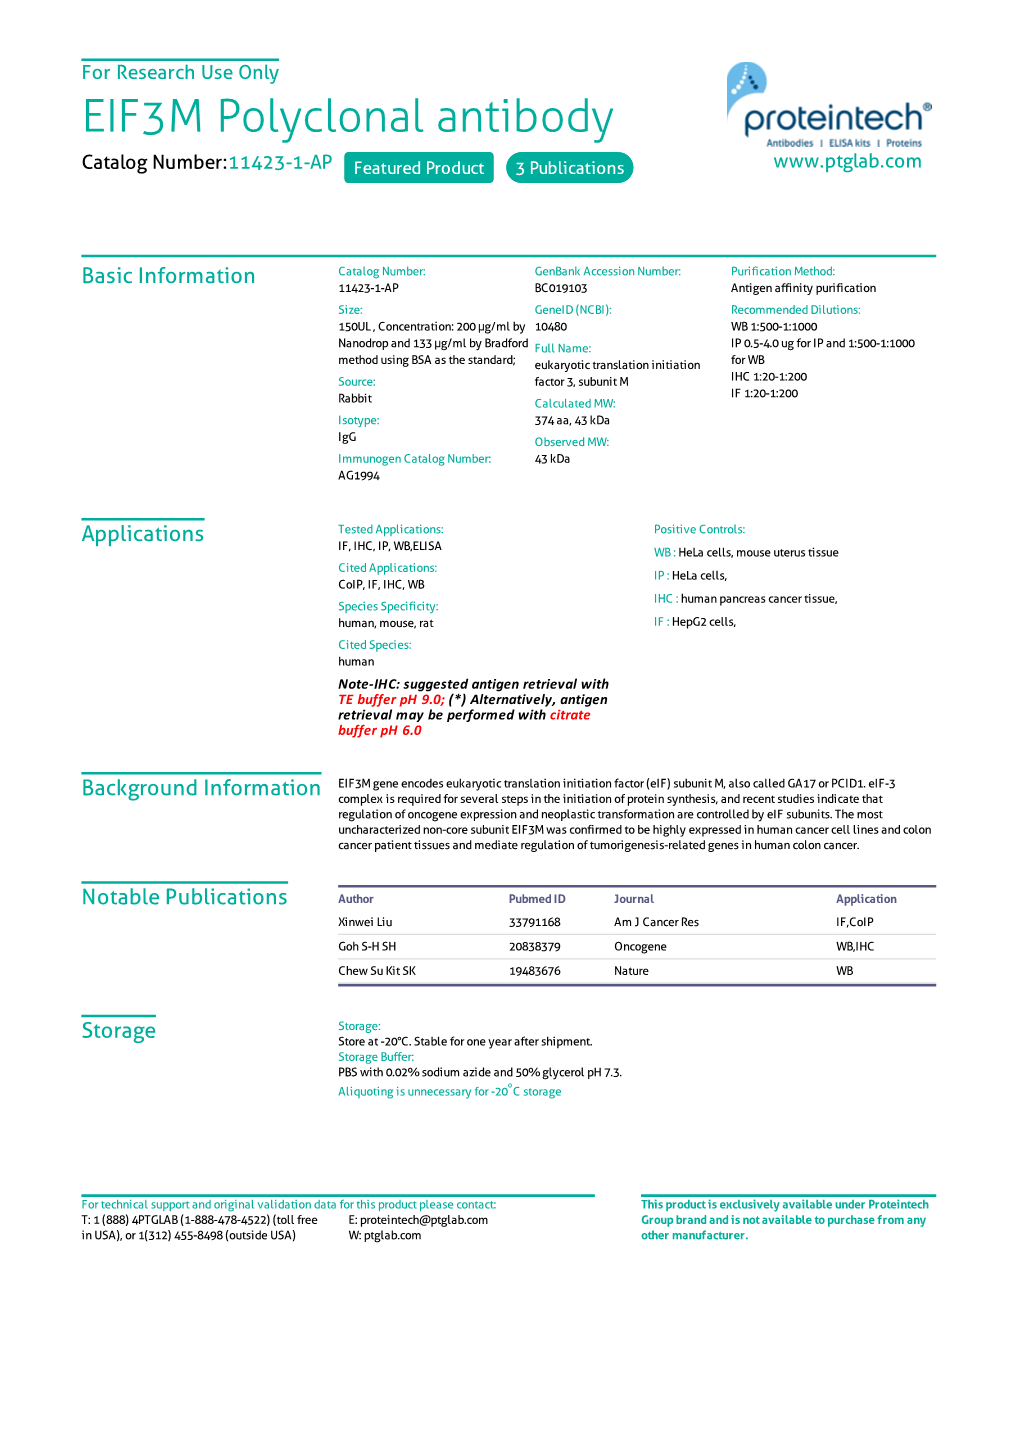 EIF3M Polyclonal Antibody Catalog Number:11423-1-AP Featured Product 3 Publications